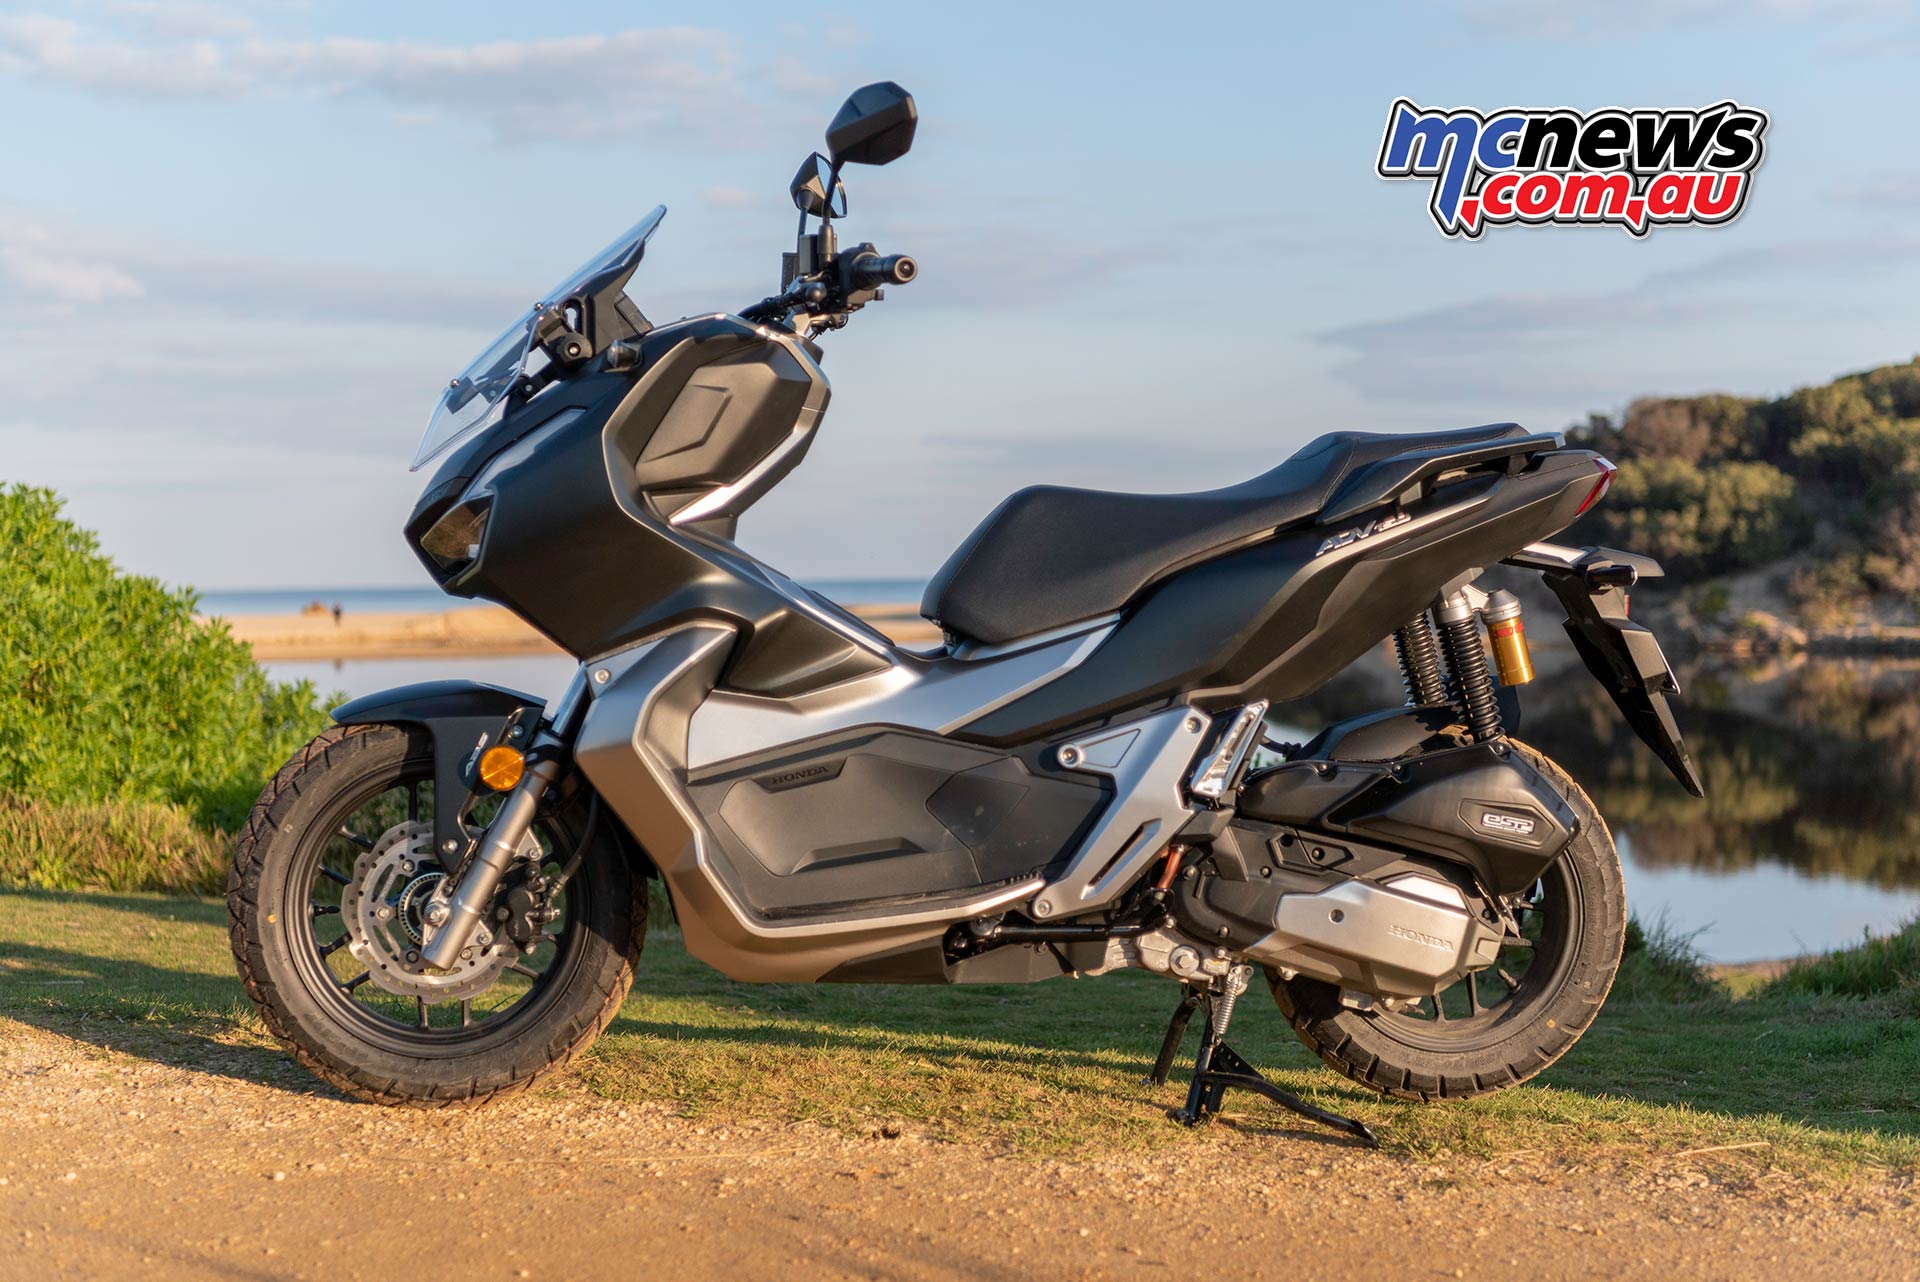 Honda Adv150 Review Scooter Tests Mcnews